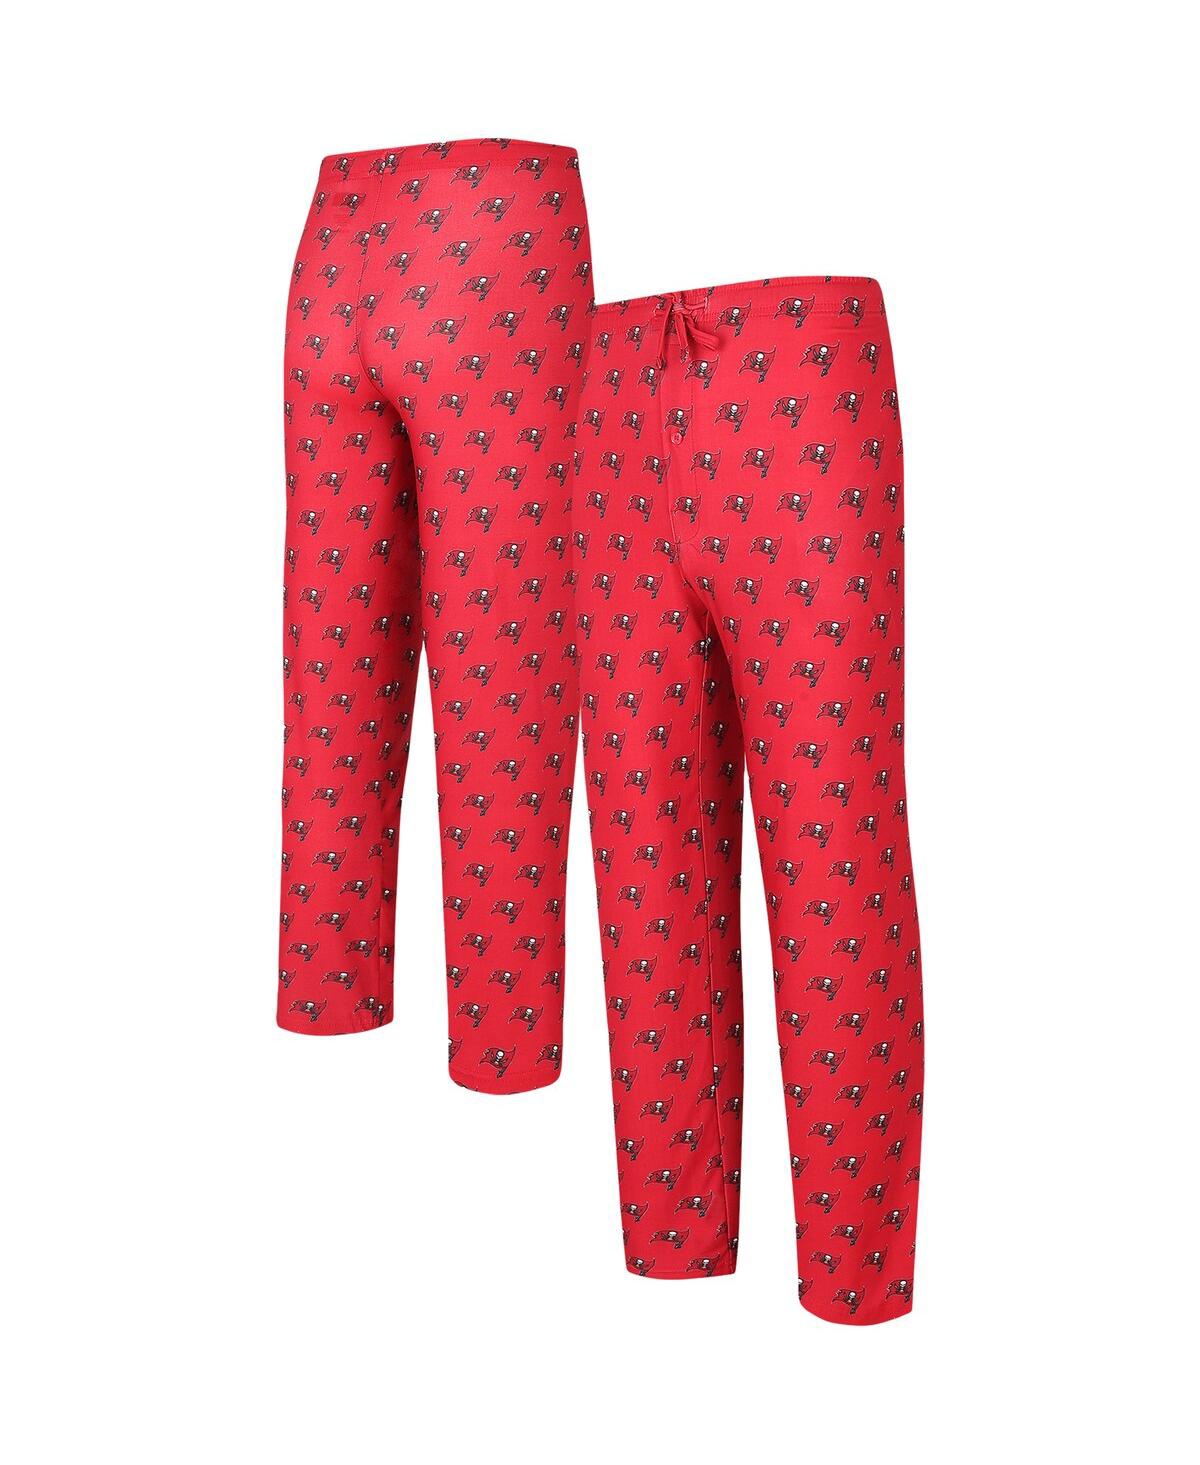 Men's Concepts Sport Red Tampa Bay Buccaneers Gauge Allover Print Knit Pants - Red